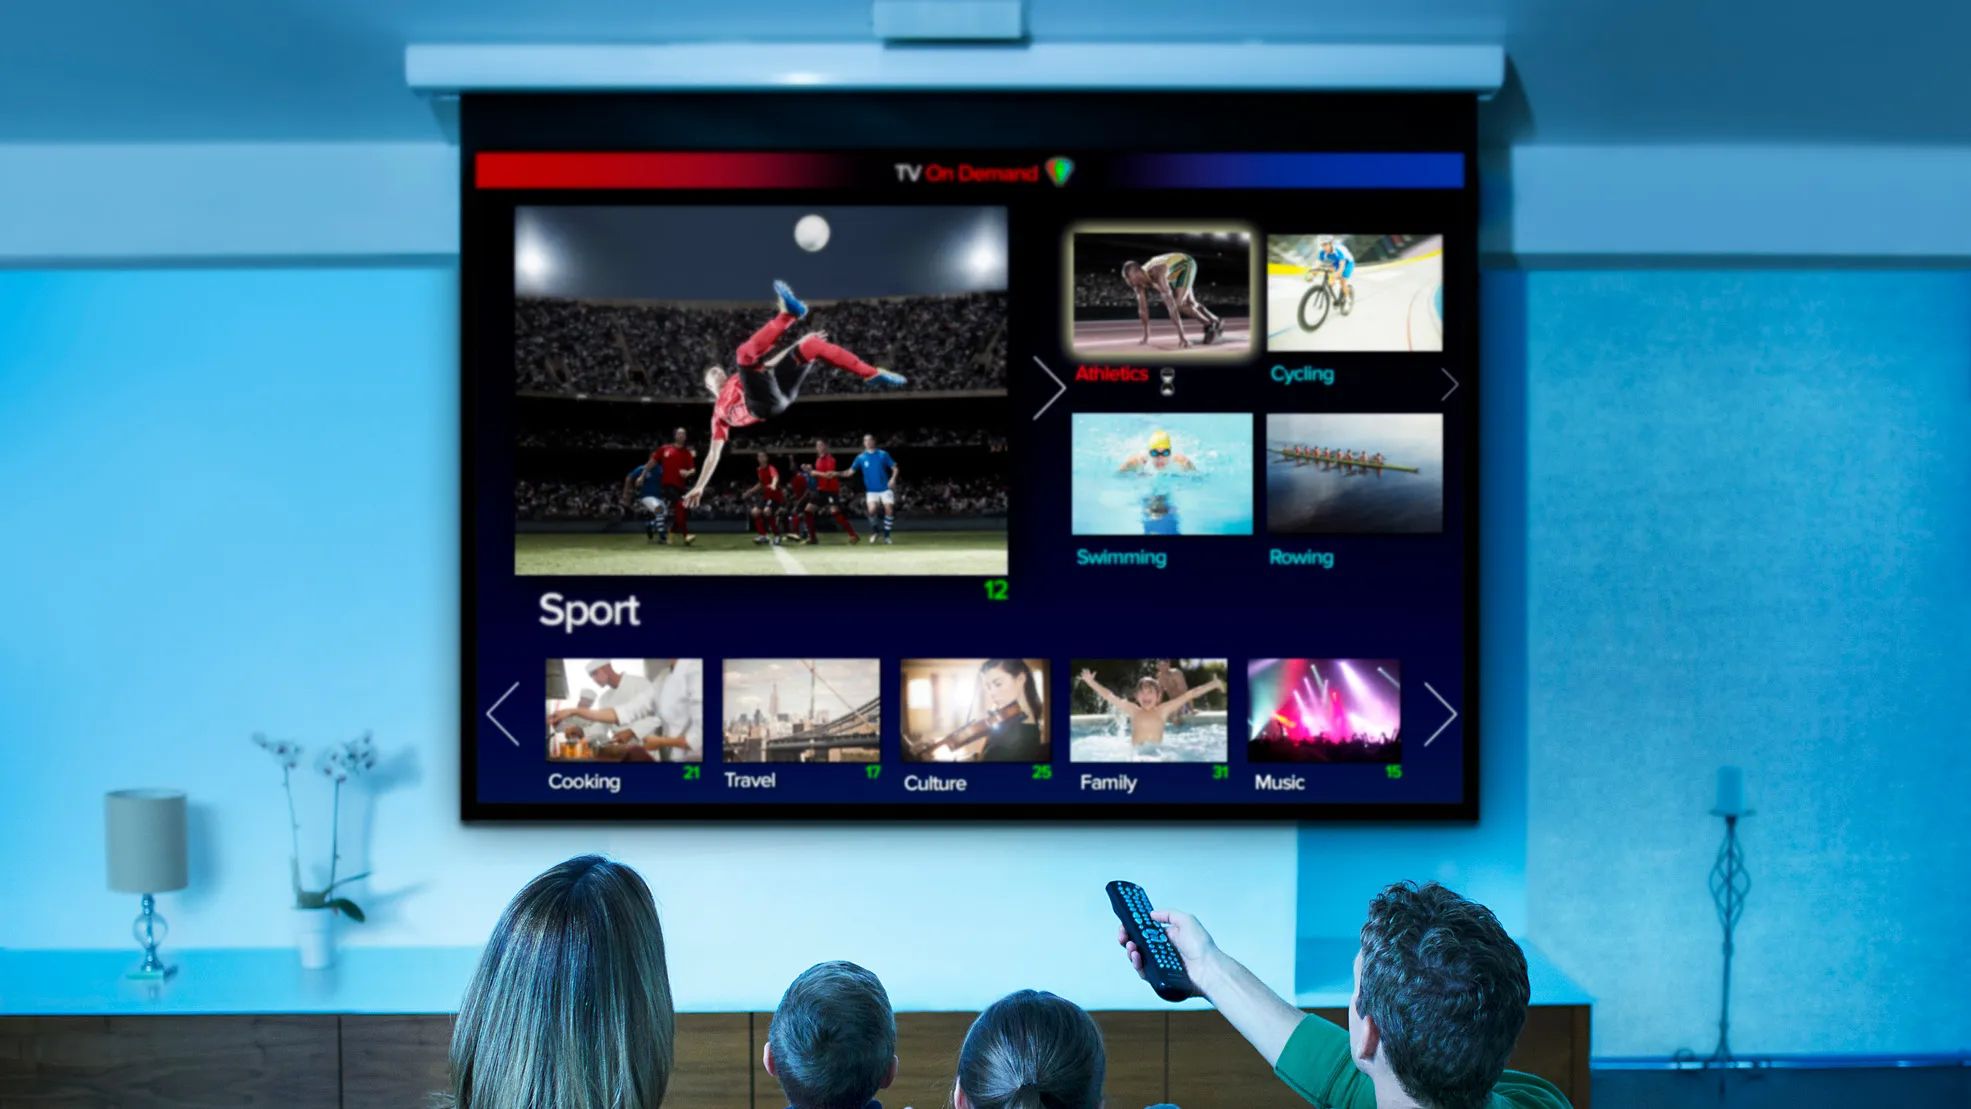 How To Get Bally Sports On Smart TV